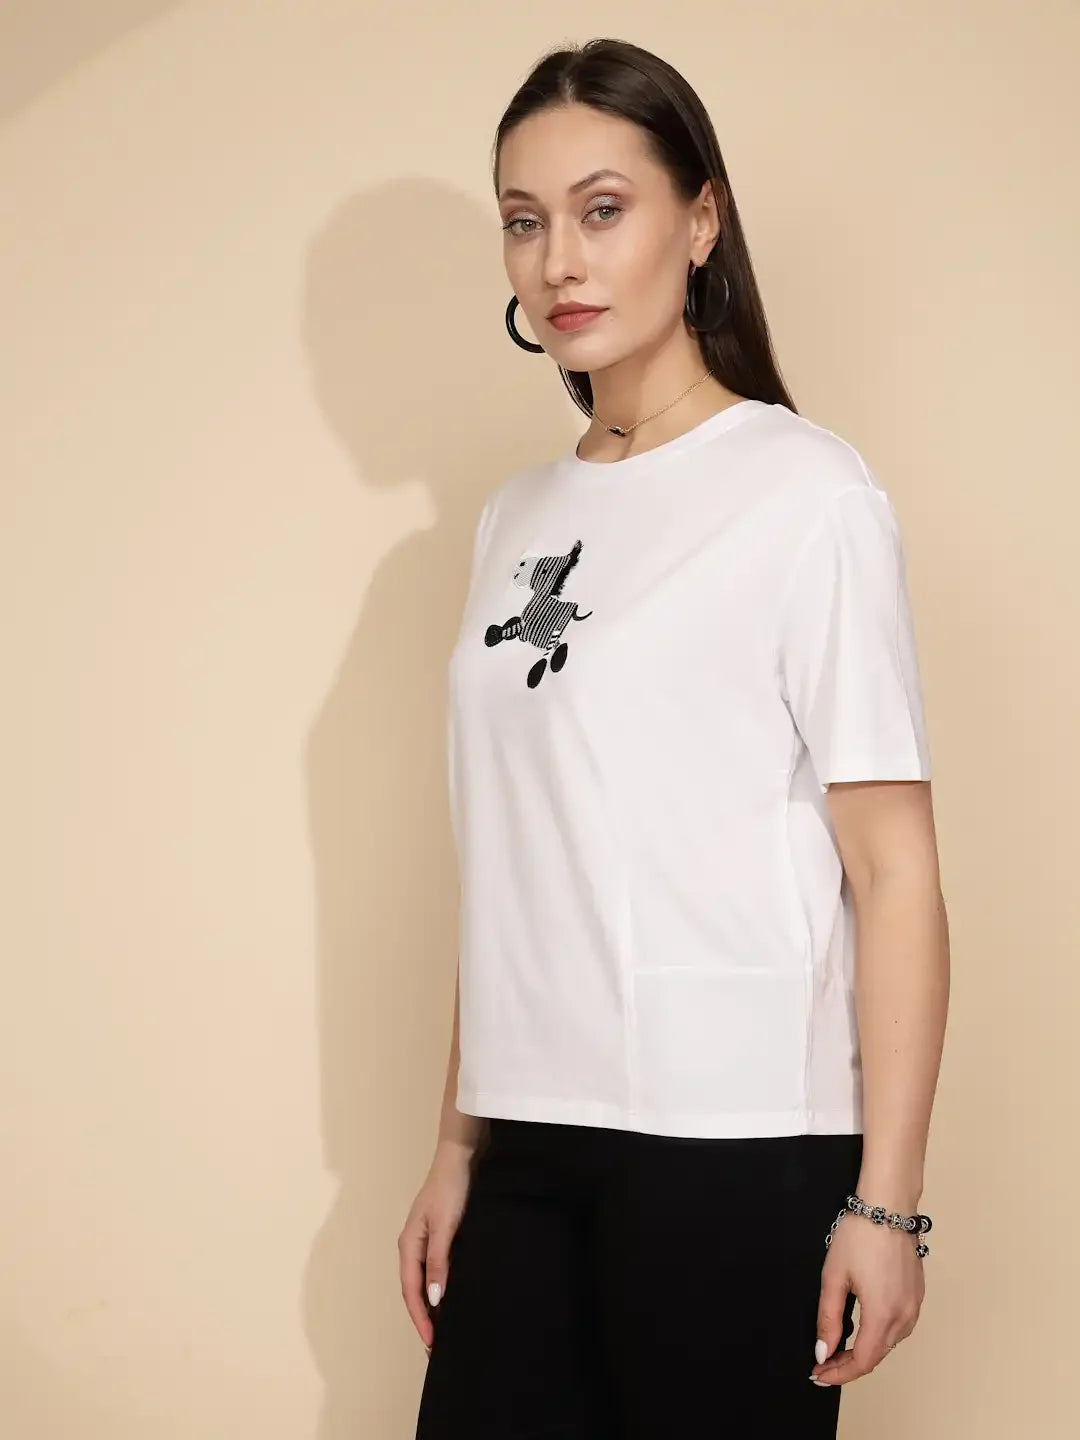 White Cotton Regular Fit Top For Women